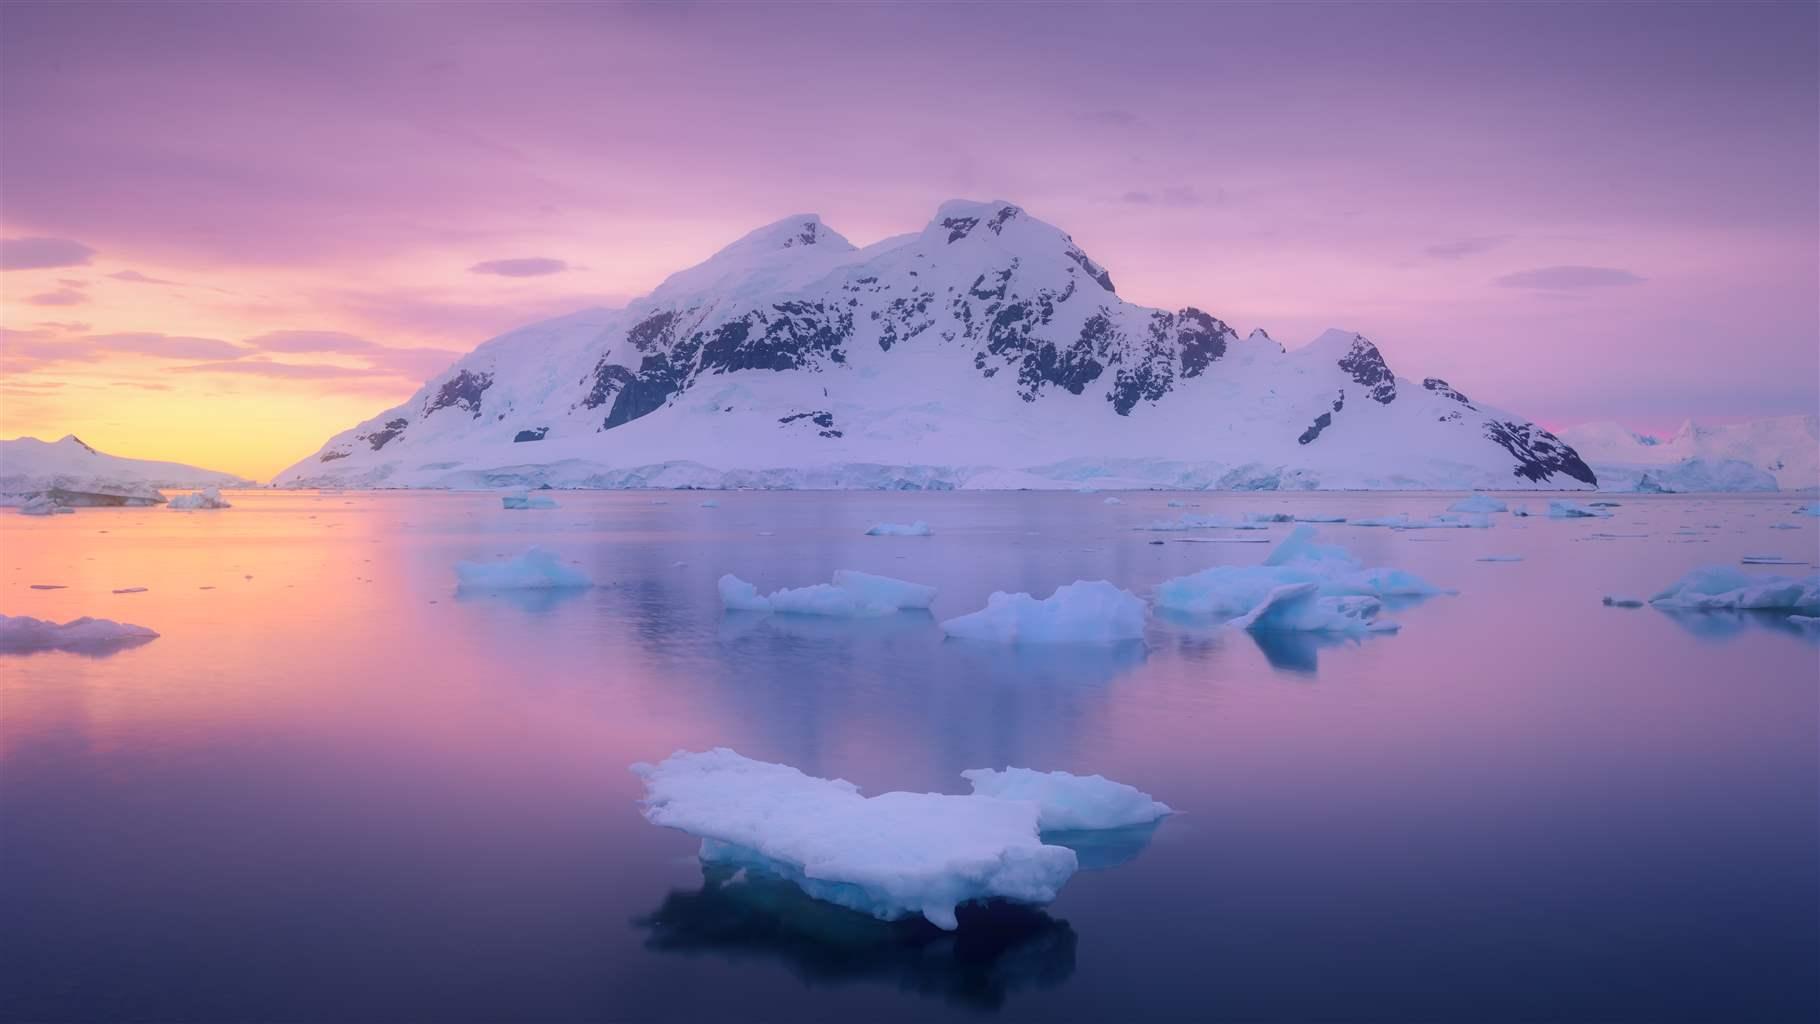 The sun is setting behind a snow-covered mountain, casting an orange glow across still deep blue water. Several ice floes float in the water, and the sky above is a light purple.